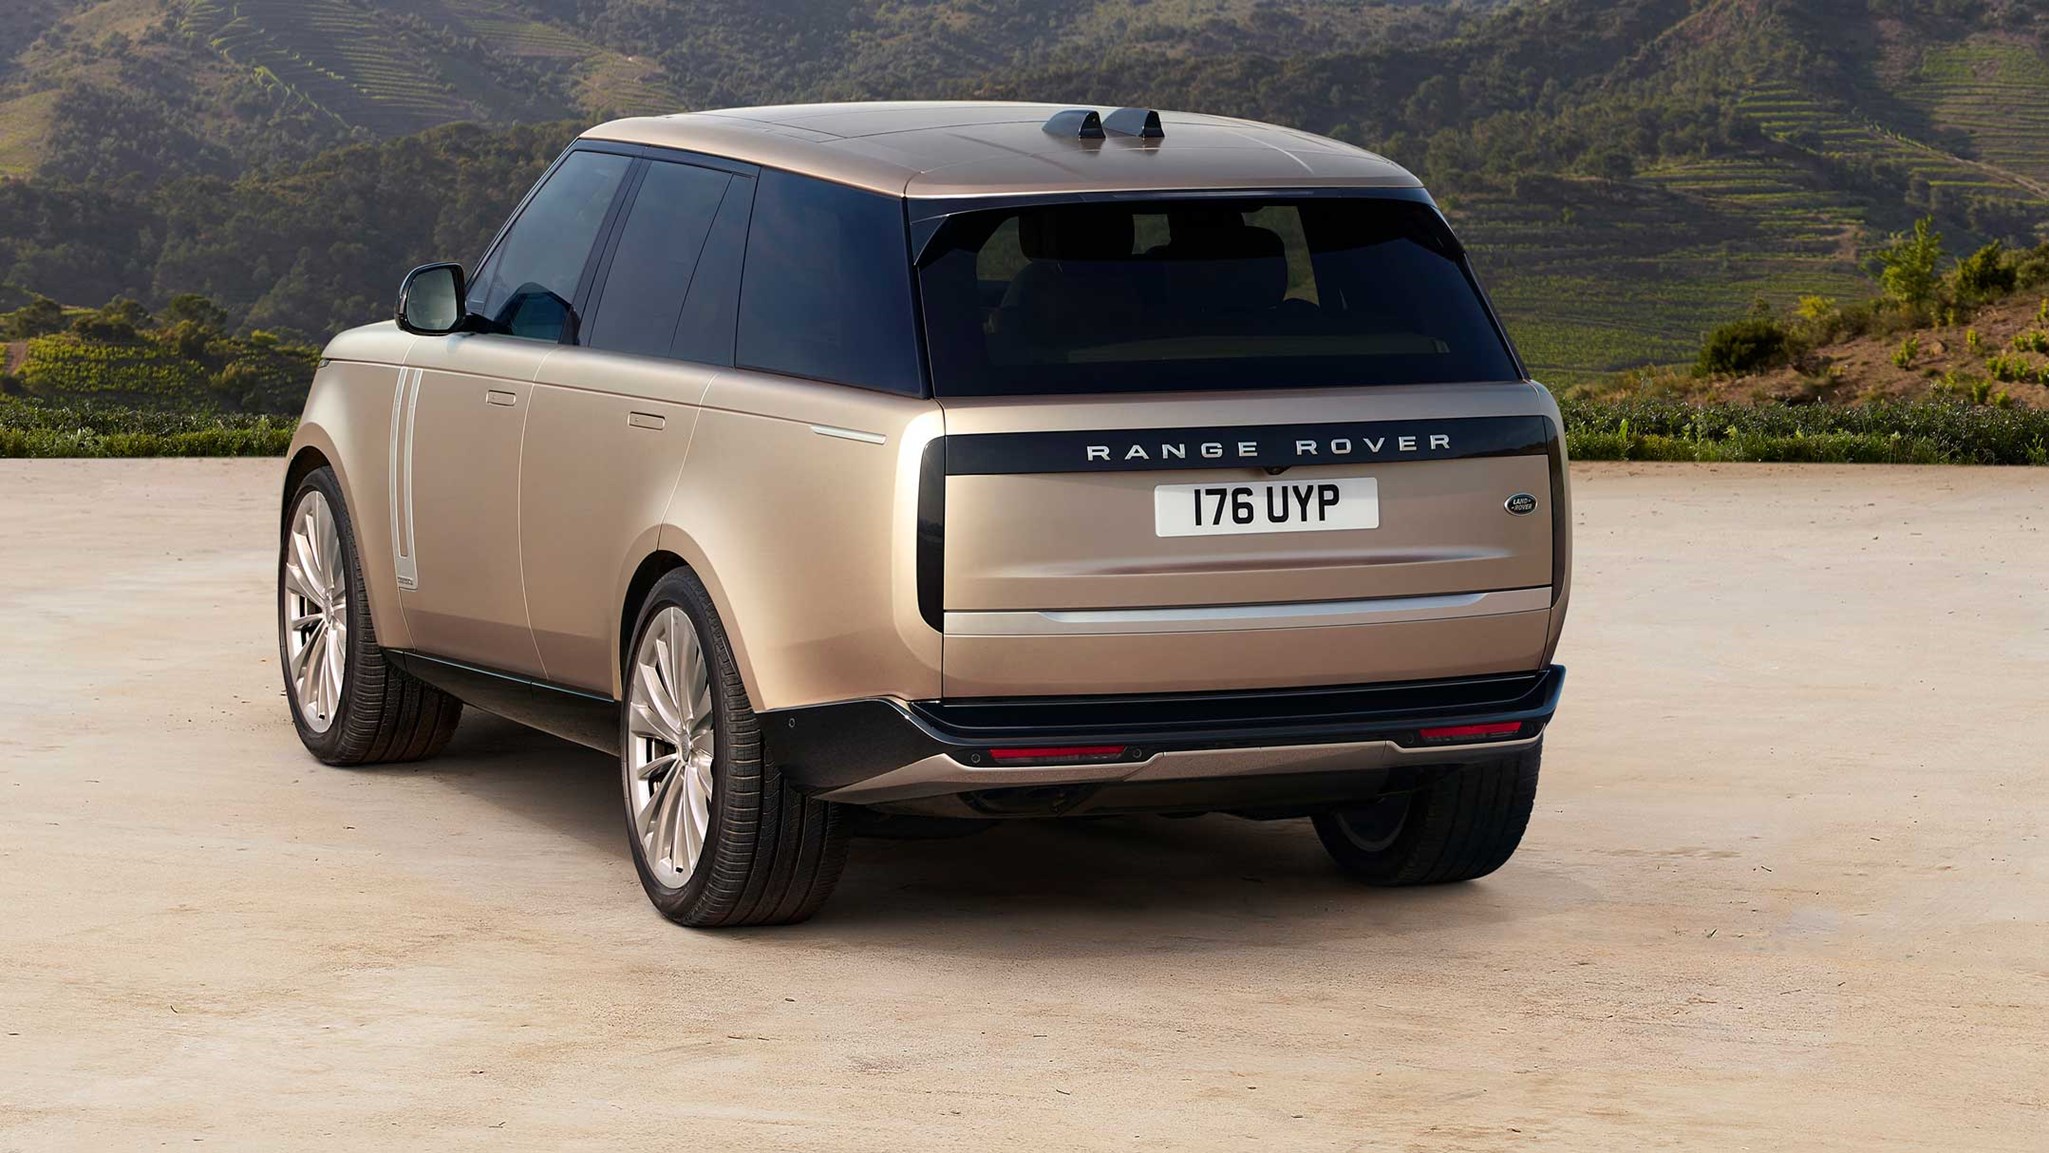 New 2022 Range Rover revealed: everything you need to know